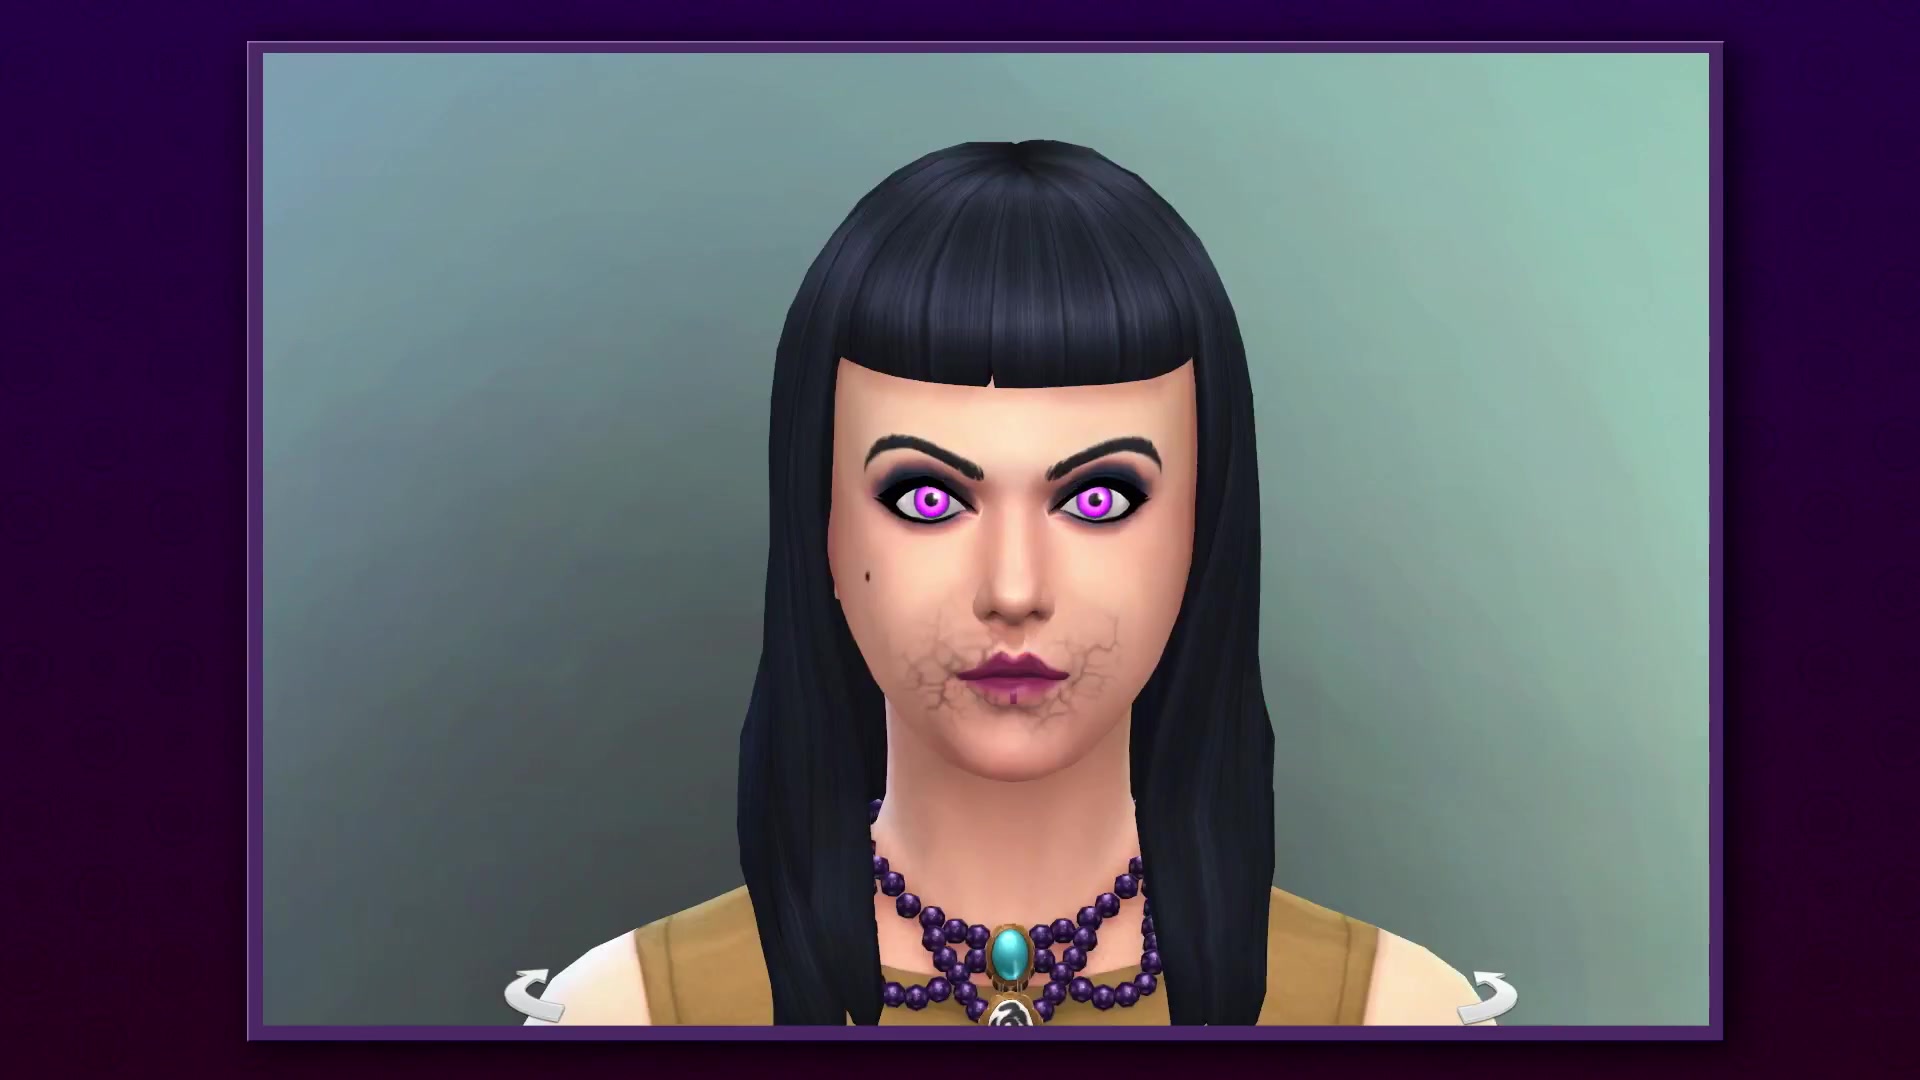 sims 4 keep vampires out mod